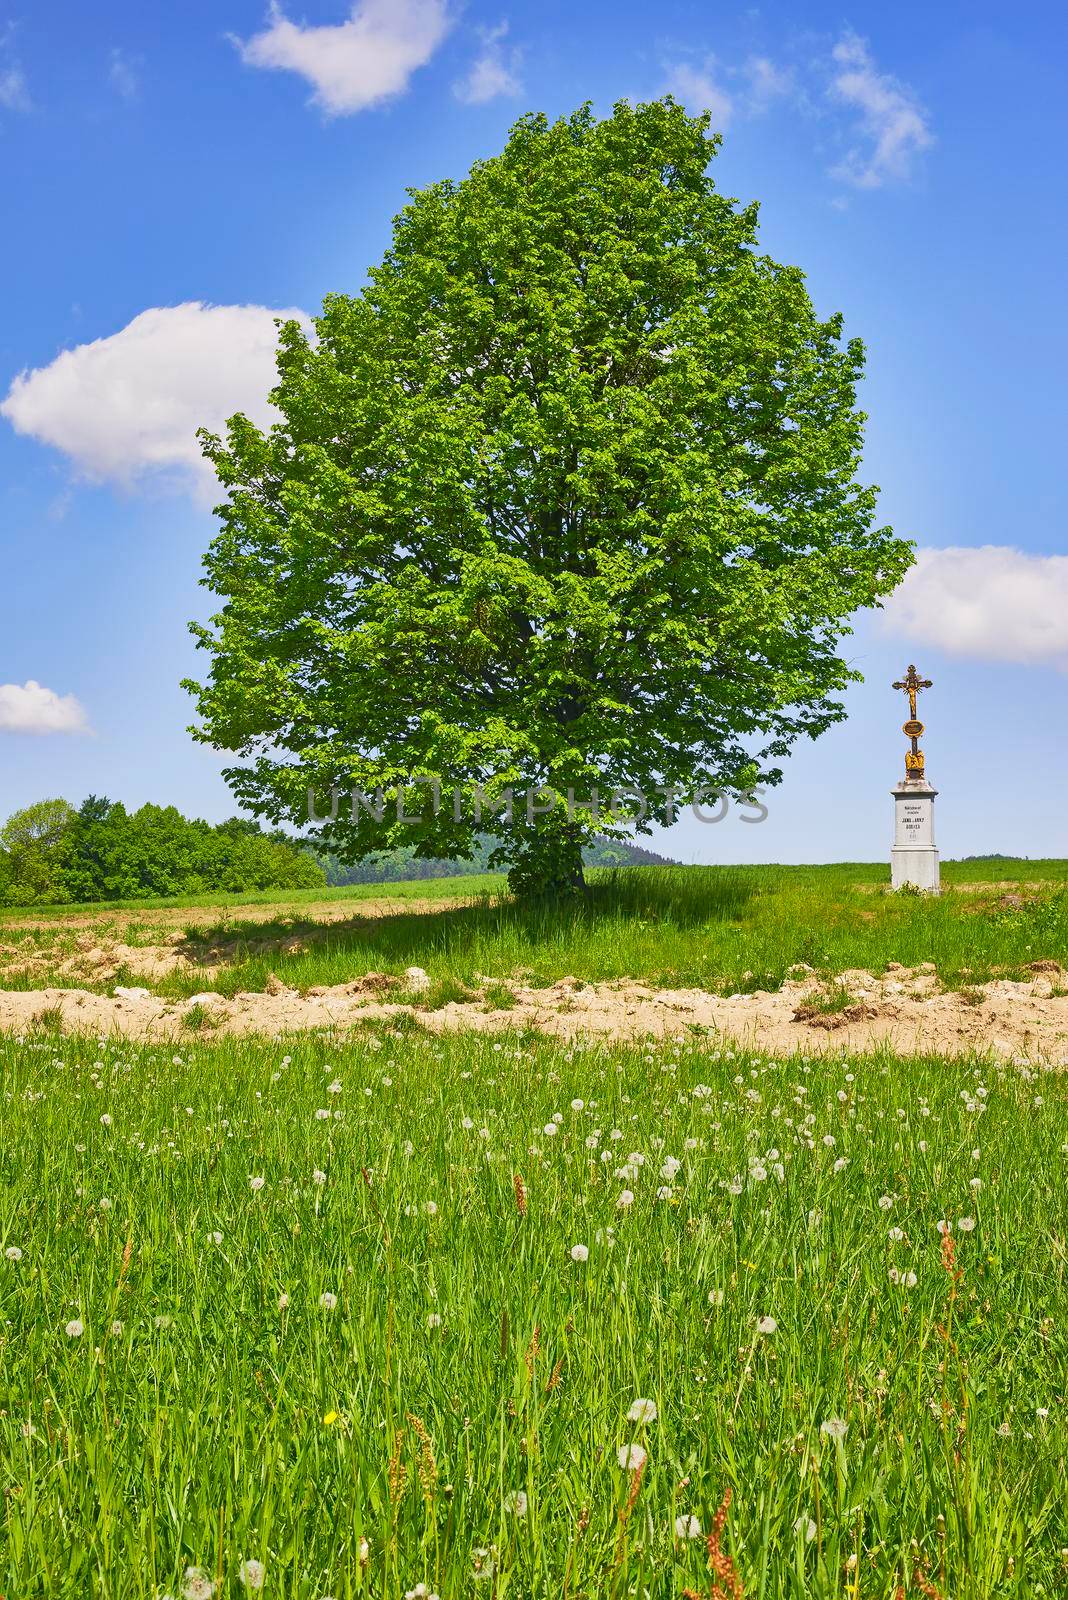 View of spring meadow with a tree with sky in background